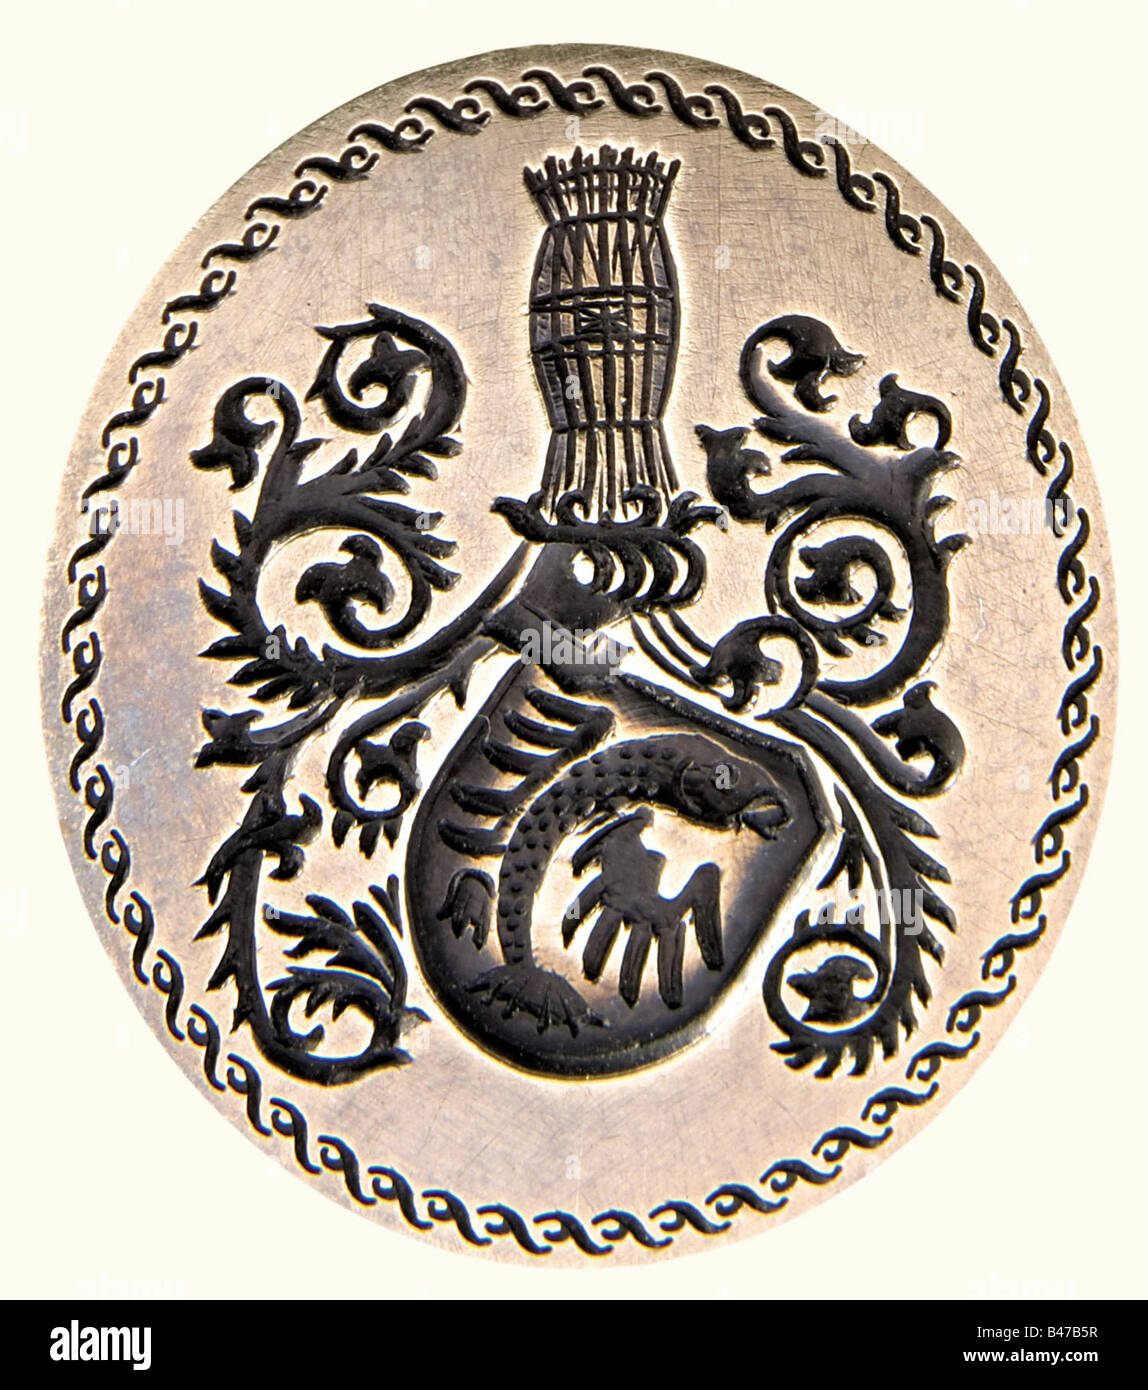 Annette von Droste-Hülshoff (1797 - 1848), a seal with ivory handle of the German poetess Coat of arms carved in brass, the shield with a winged fish, above a helmet and fish trap. The ivory handle is probably from an earlier period and shows a three-dimensionally carved female with a child on her arm and two at her feet. Height 69 mm. Enclosed a gilt-edged album with about 20 poems of various artists, written in ink, and different handwritings, one poem presumably by Annette von Droste-Hülshoff (partially monogramed 'A'), labelled on the lower edge 'nach Herde, Stock Photo